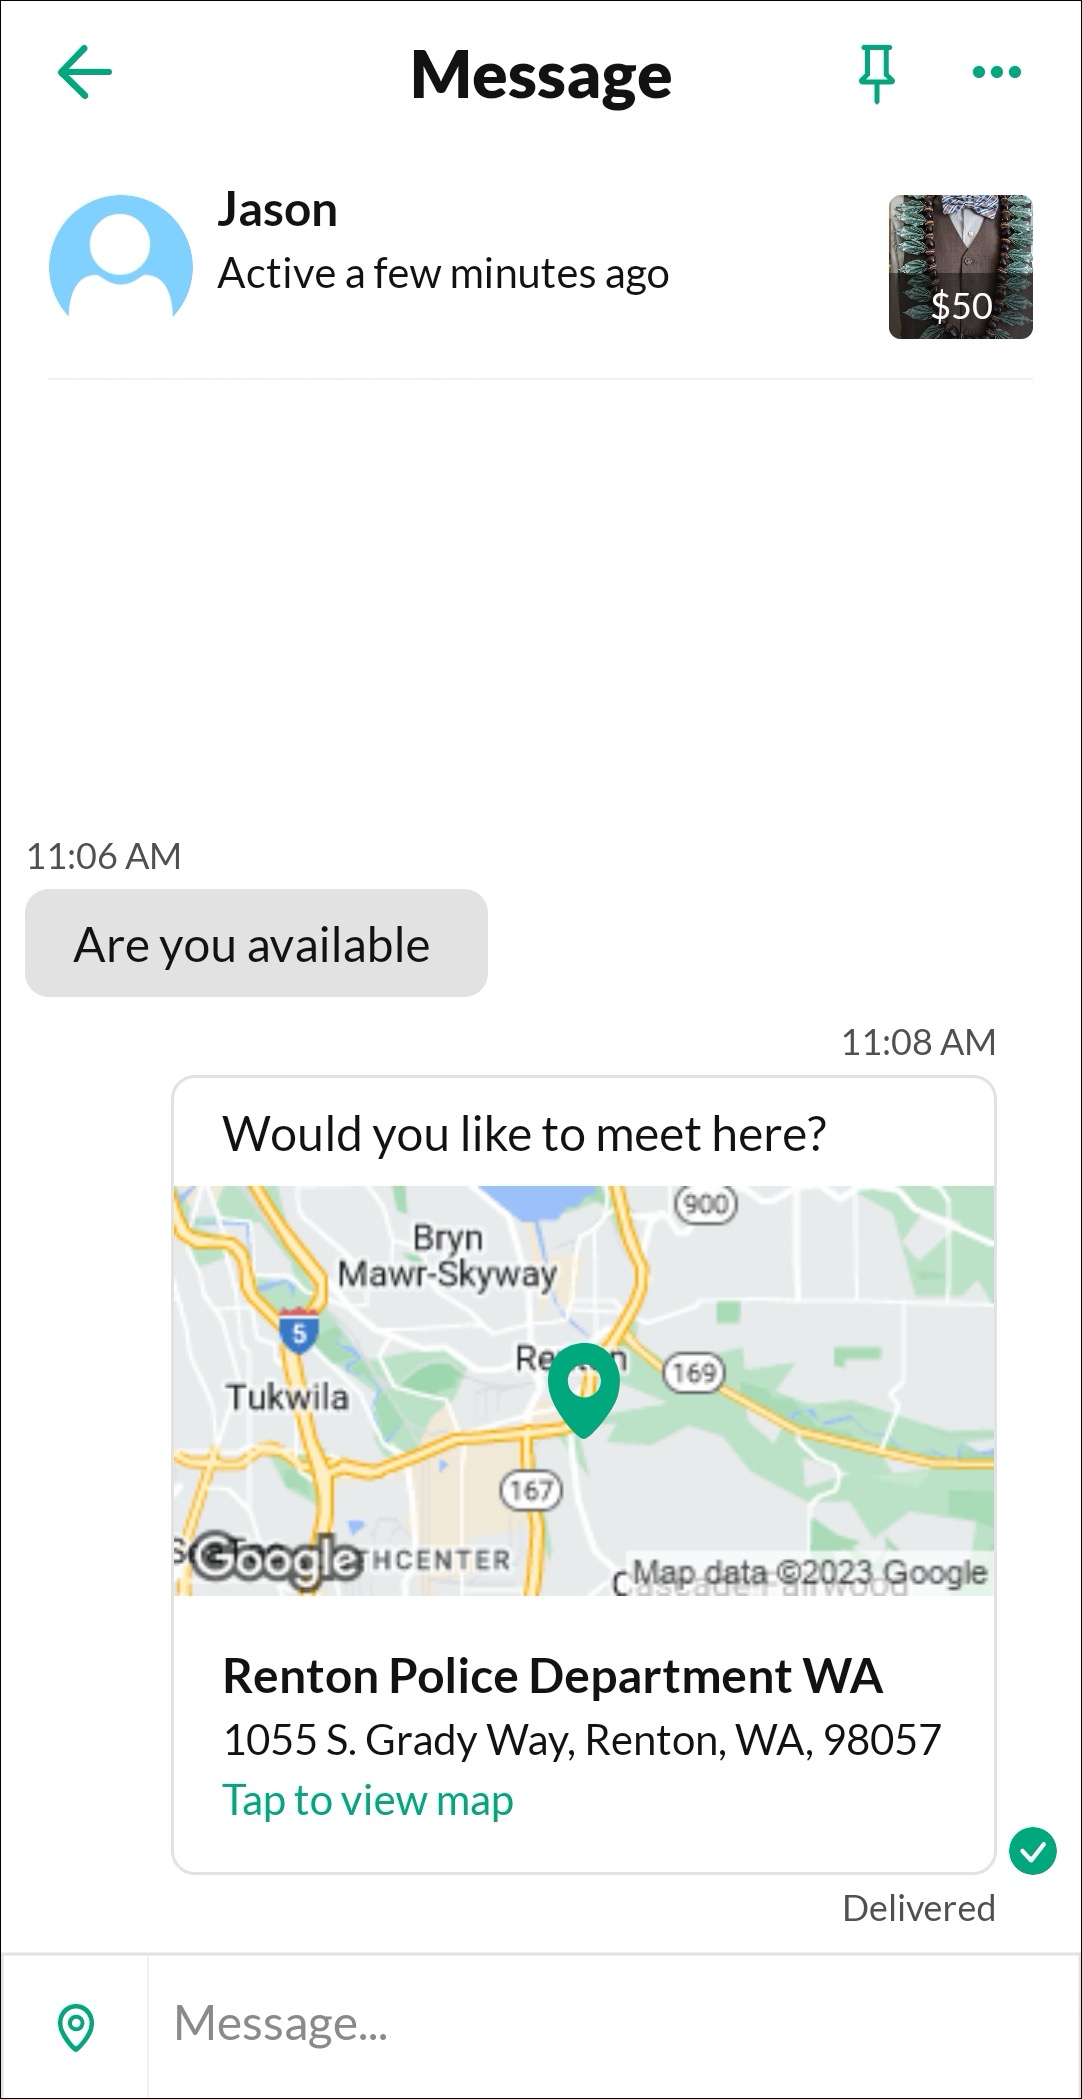 A message appears in the chat that says 'Would you like to meet here?' and includes a link to the location map.